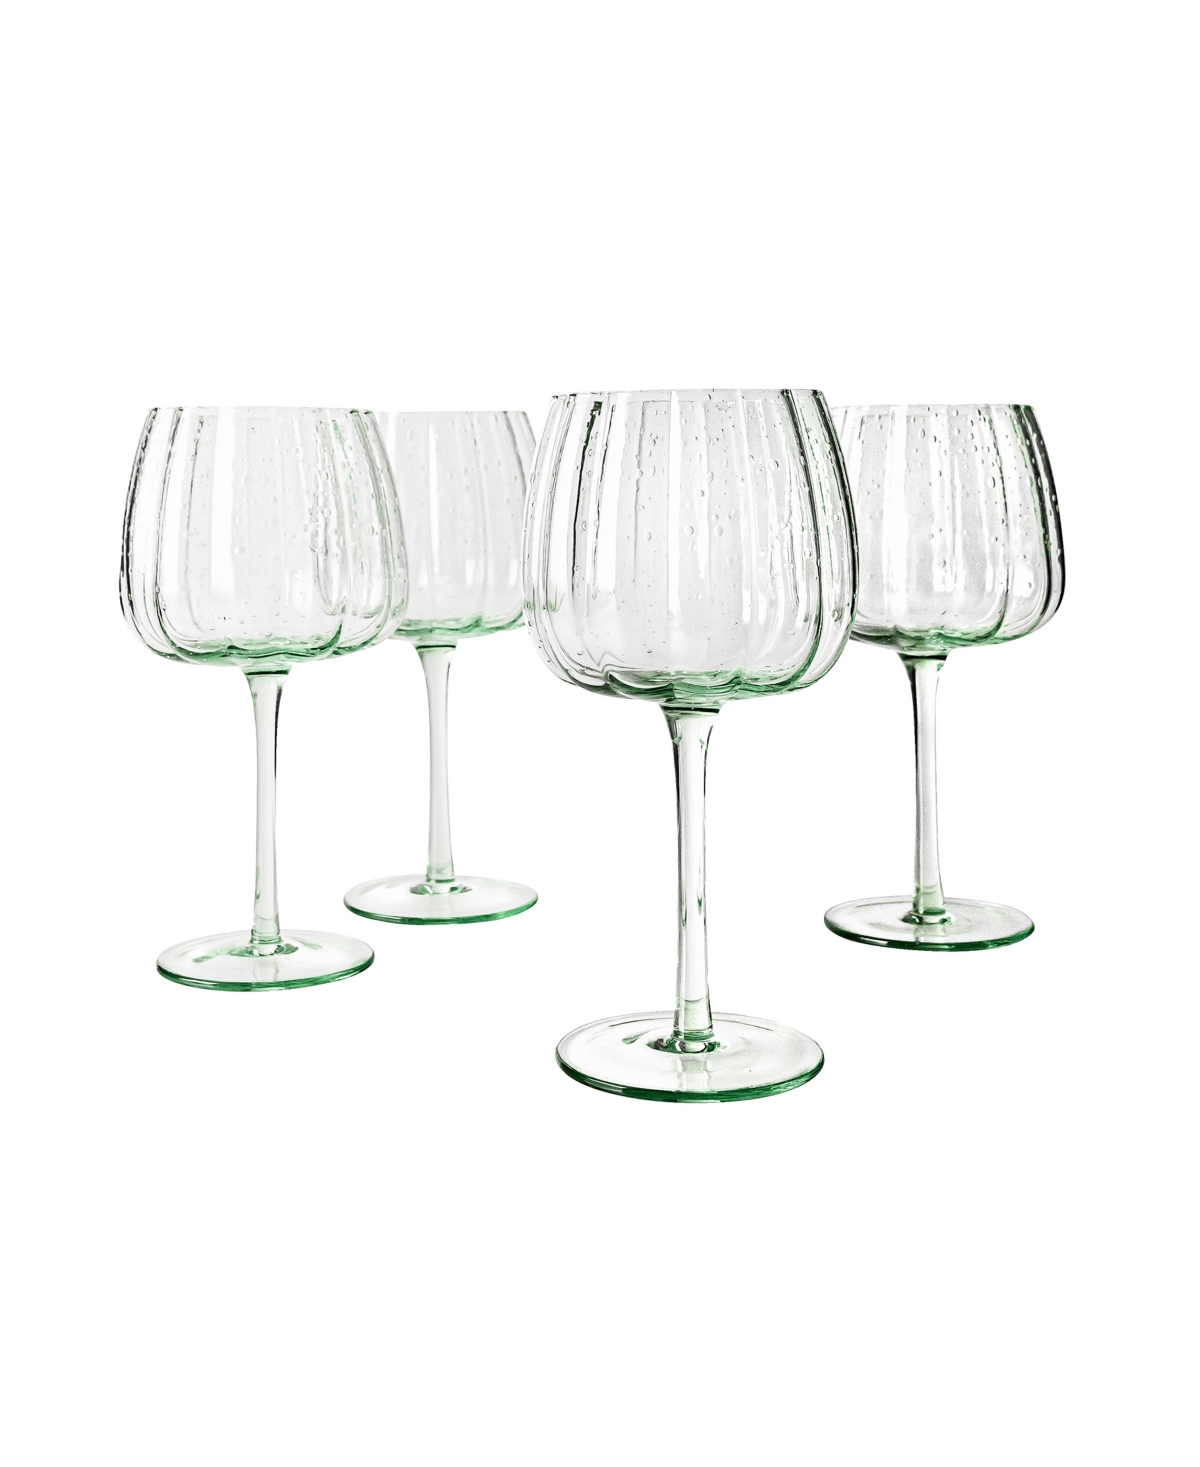 Laura Ashley Balloon Glasses, Set Of 4 In Green